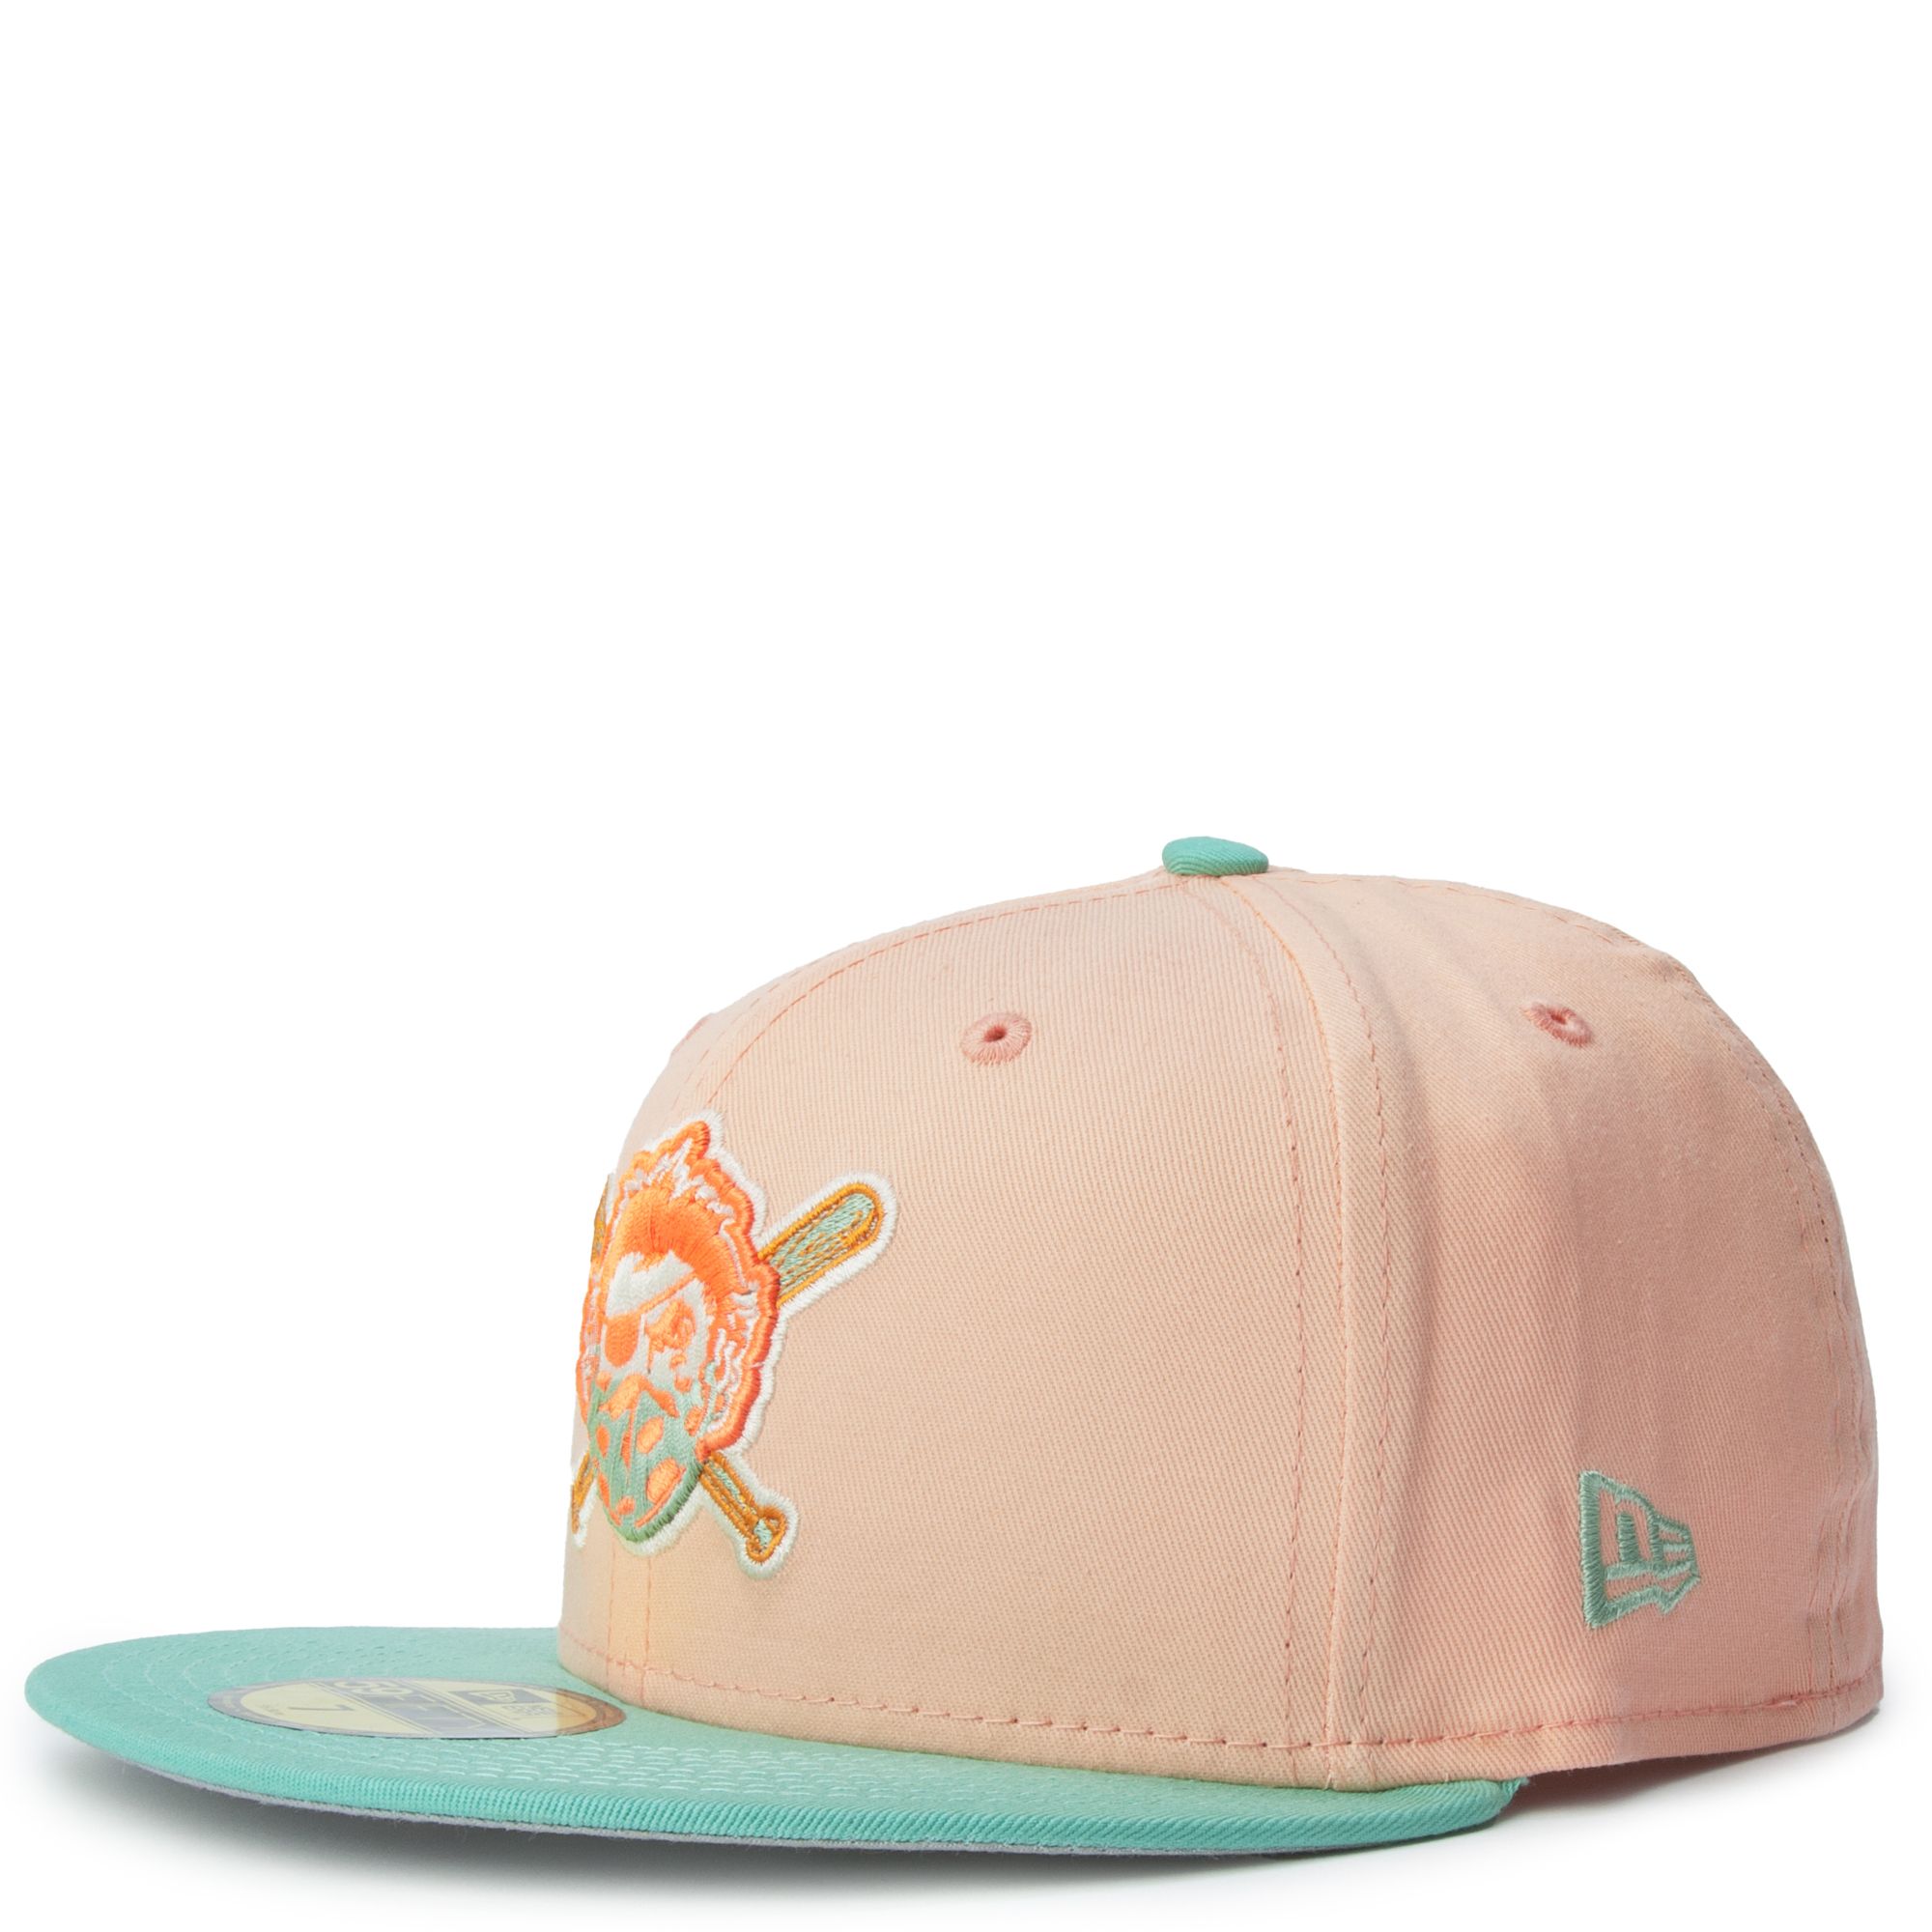 NEW ERA CAPS Tampa Bay Rays Peach Mint 59FIFTY Fitted Hat 70725294 - Shiekh